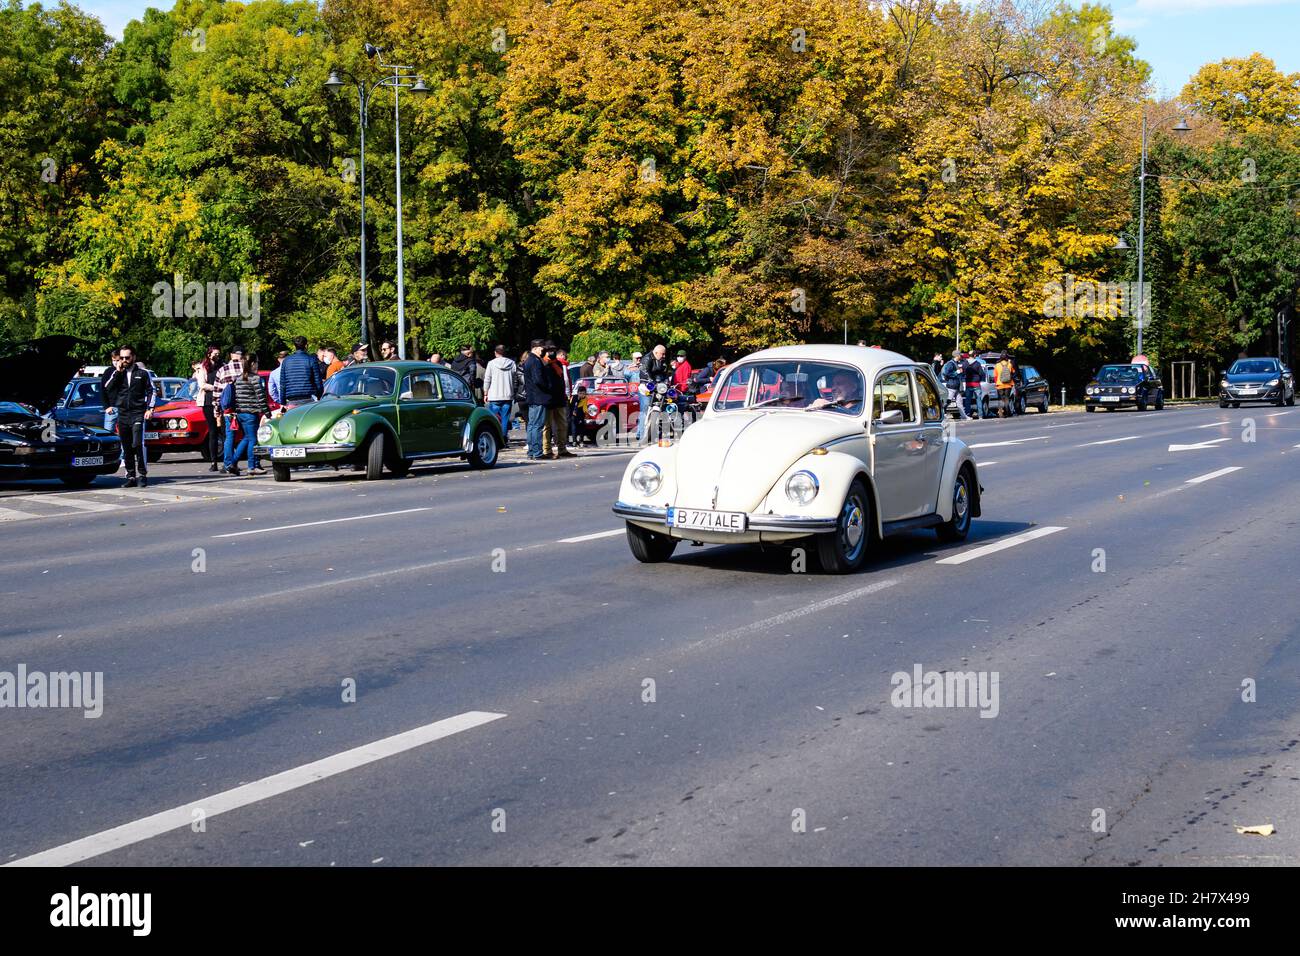 Bucharest, Romania, 24 October 2021: One white Volkswagen Beetle German vintage car in traffic in a street at an event for vintage cars collections, i Stock Photo